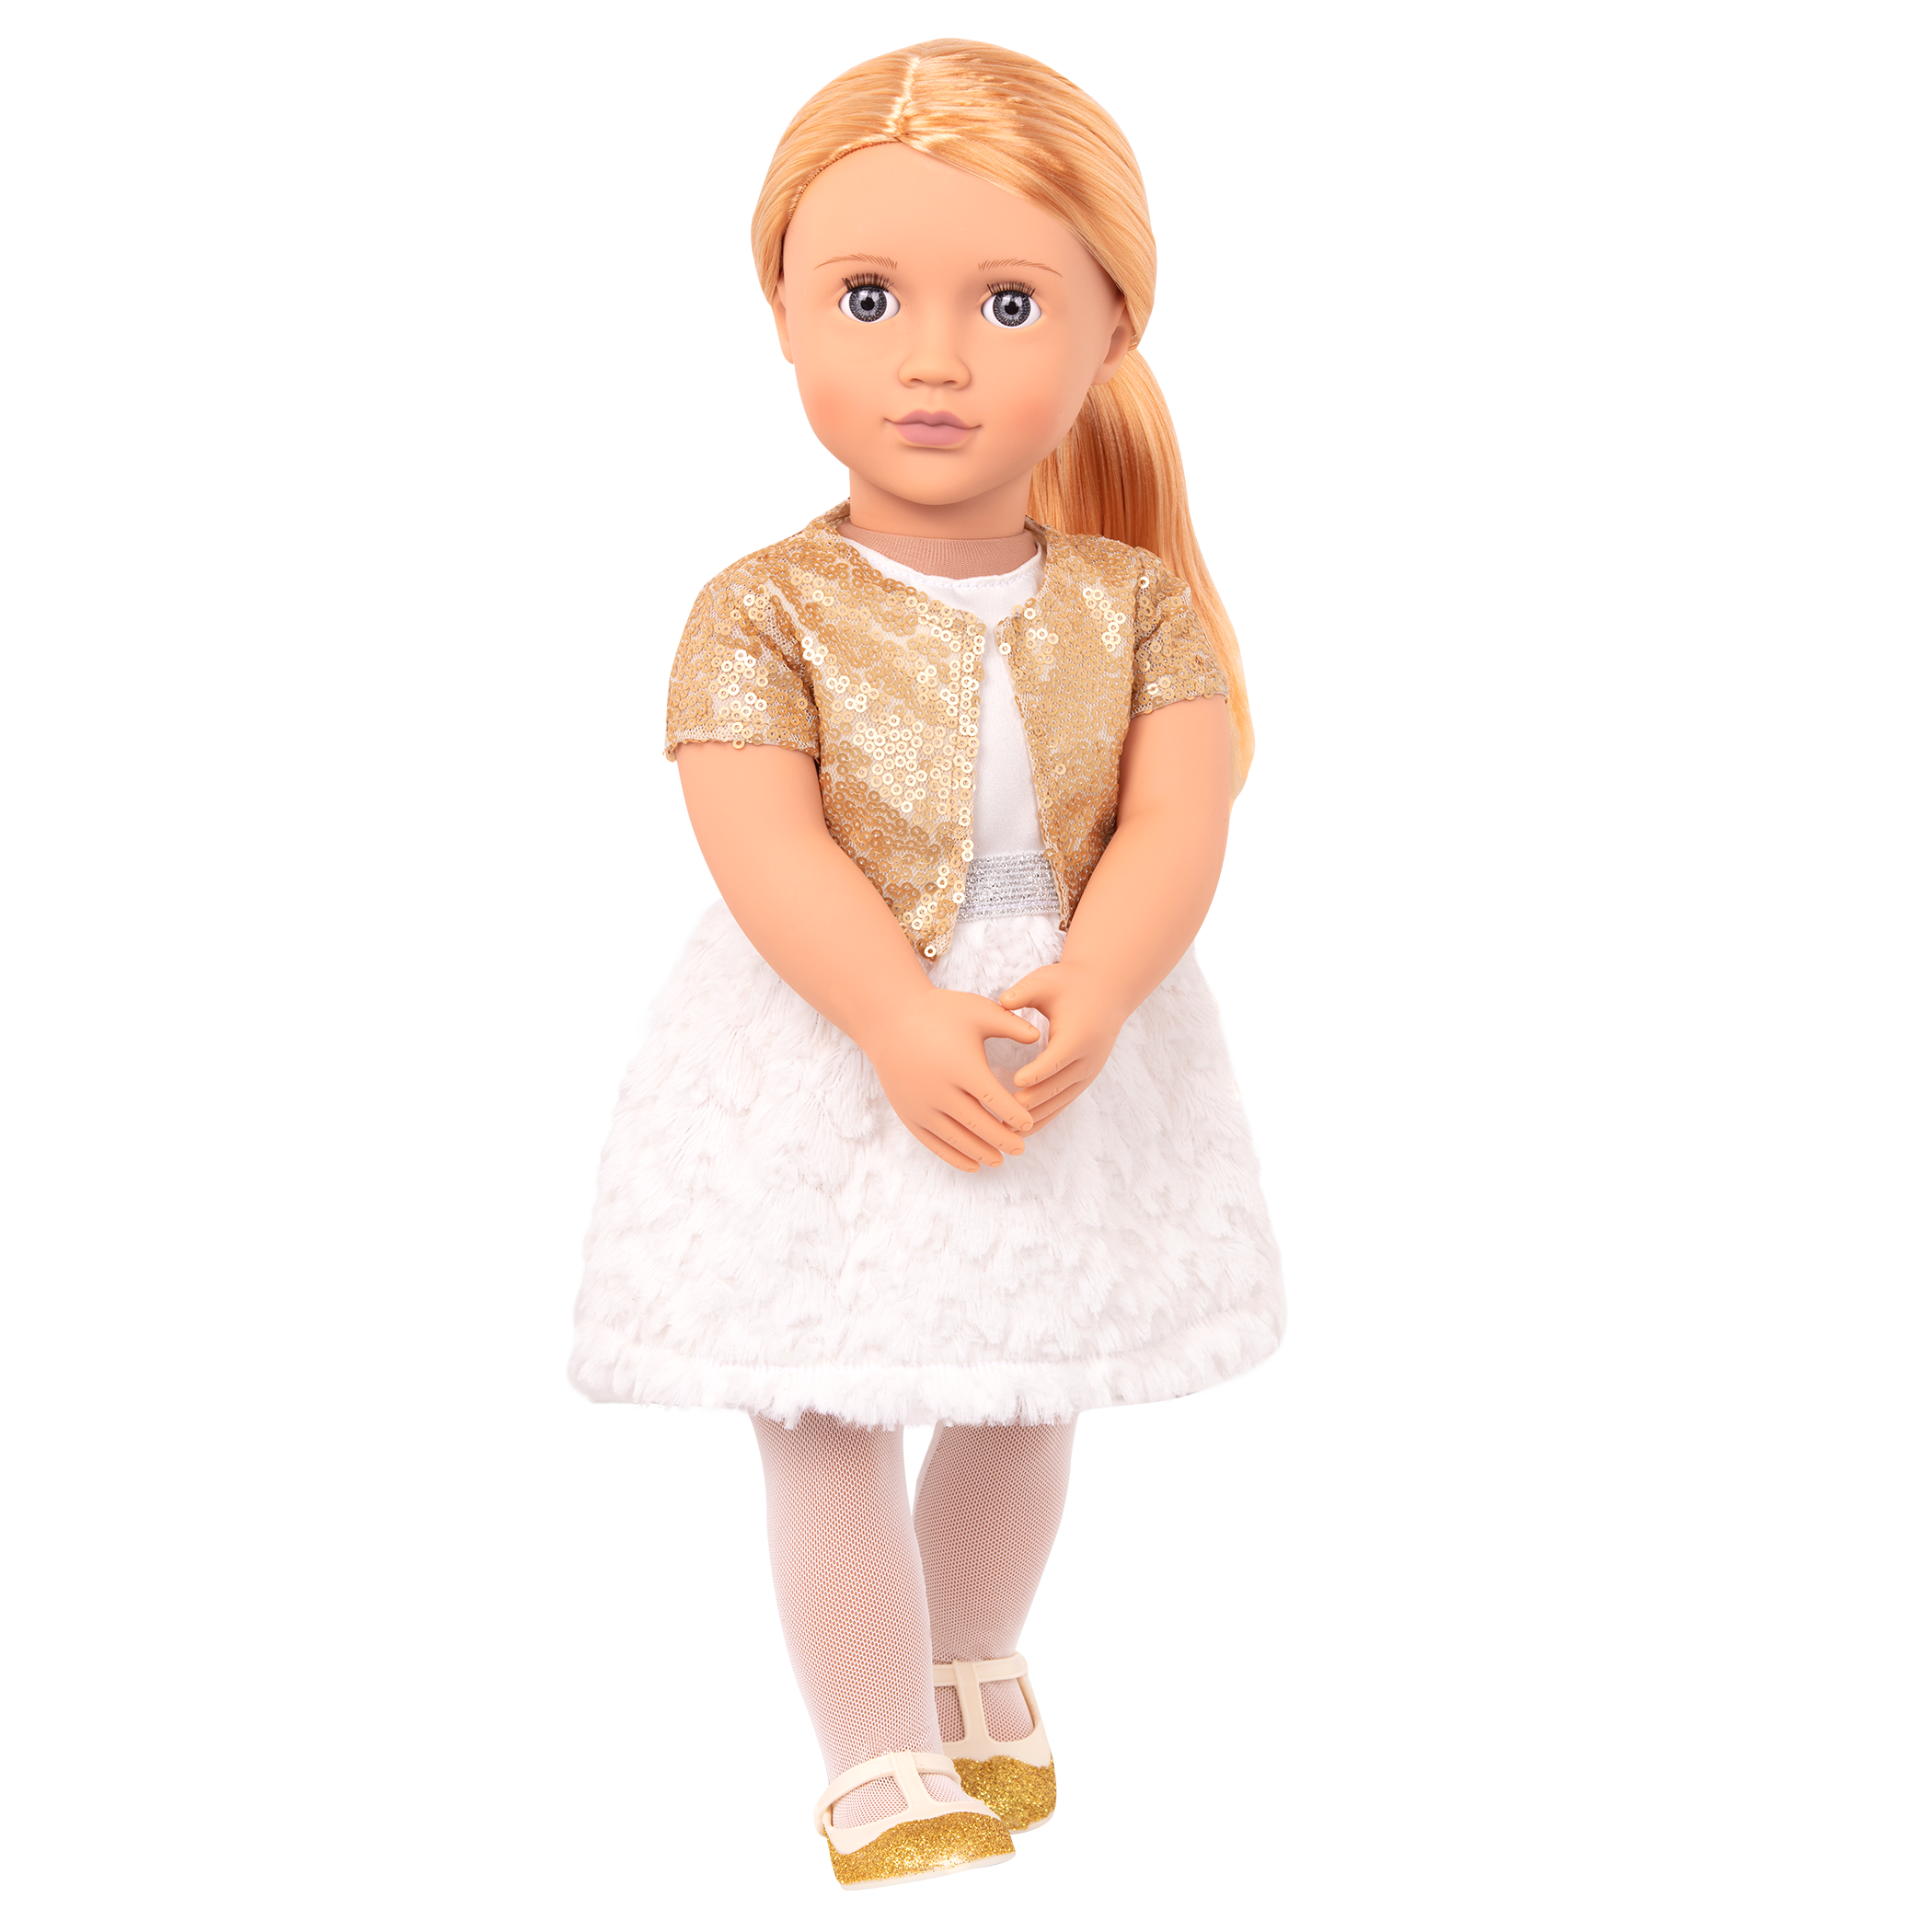 18-inch holiday doll with strawberry-blonde hair and gray eyes